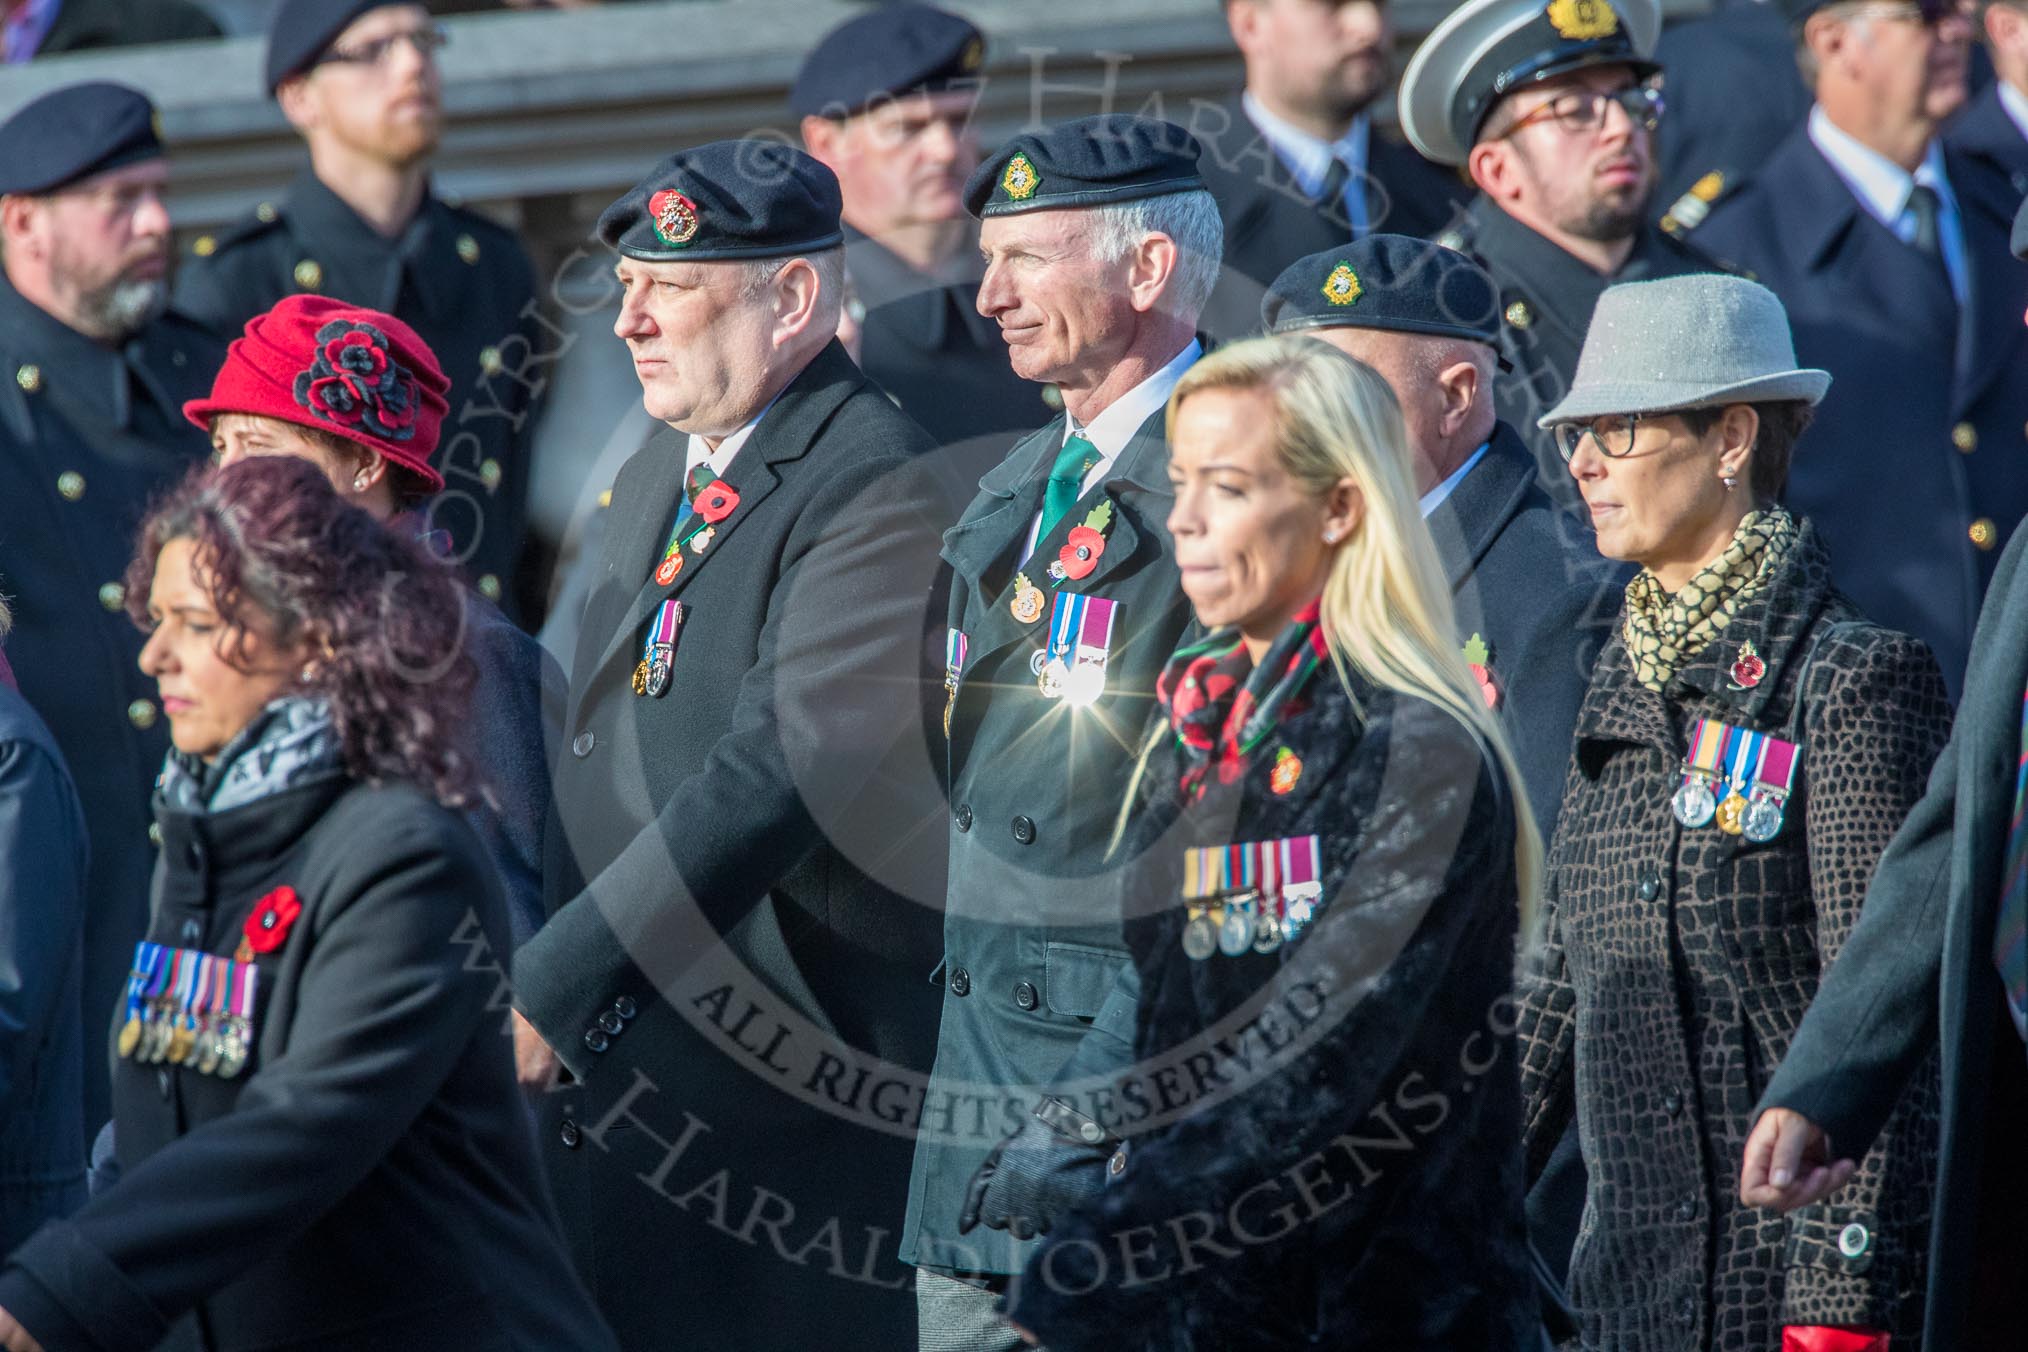 RAVC and RADC Associations (Group B2, 27 members) during the Royal British Legion March Past on Remembrance Sunday at the Cenotaph, Whitehall, Westminster, London, 11 November 2018, 12:05.